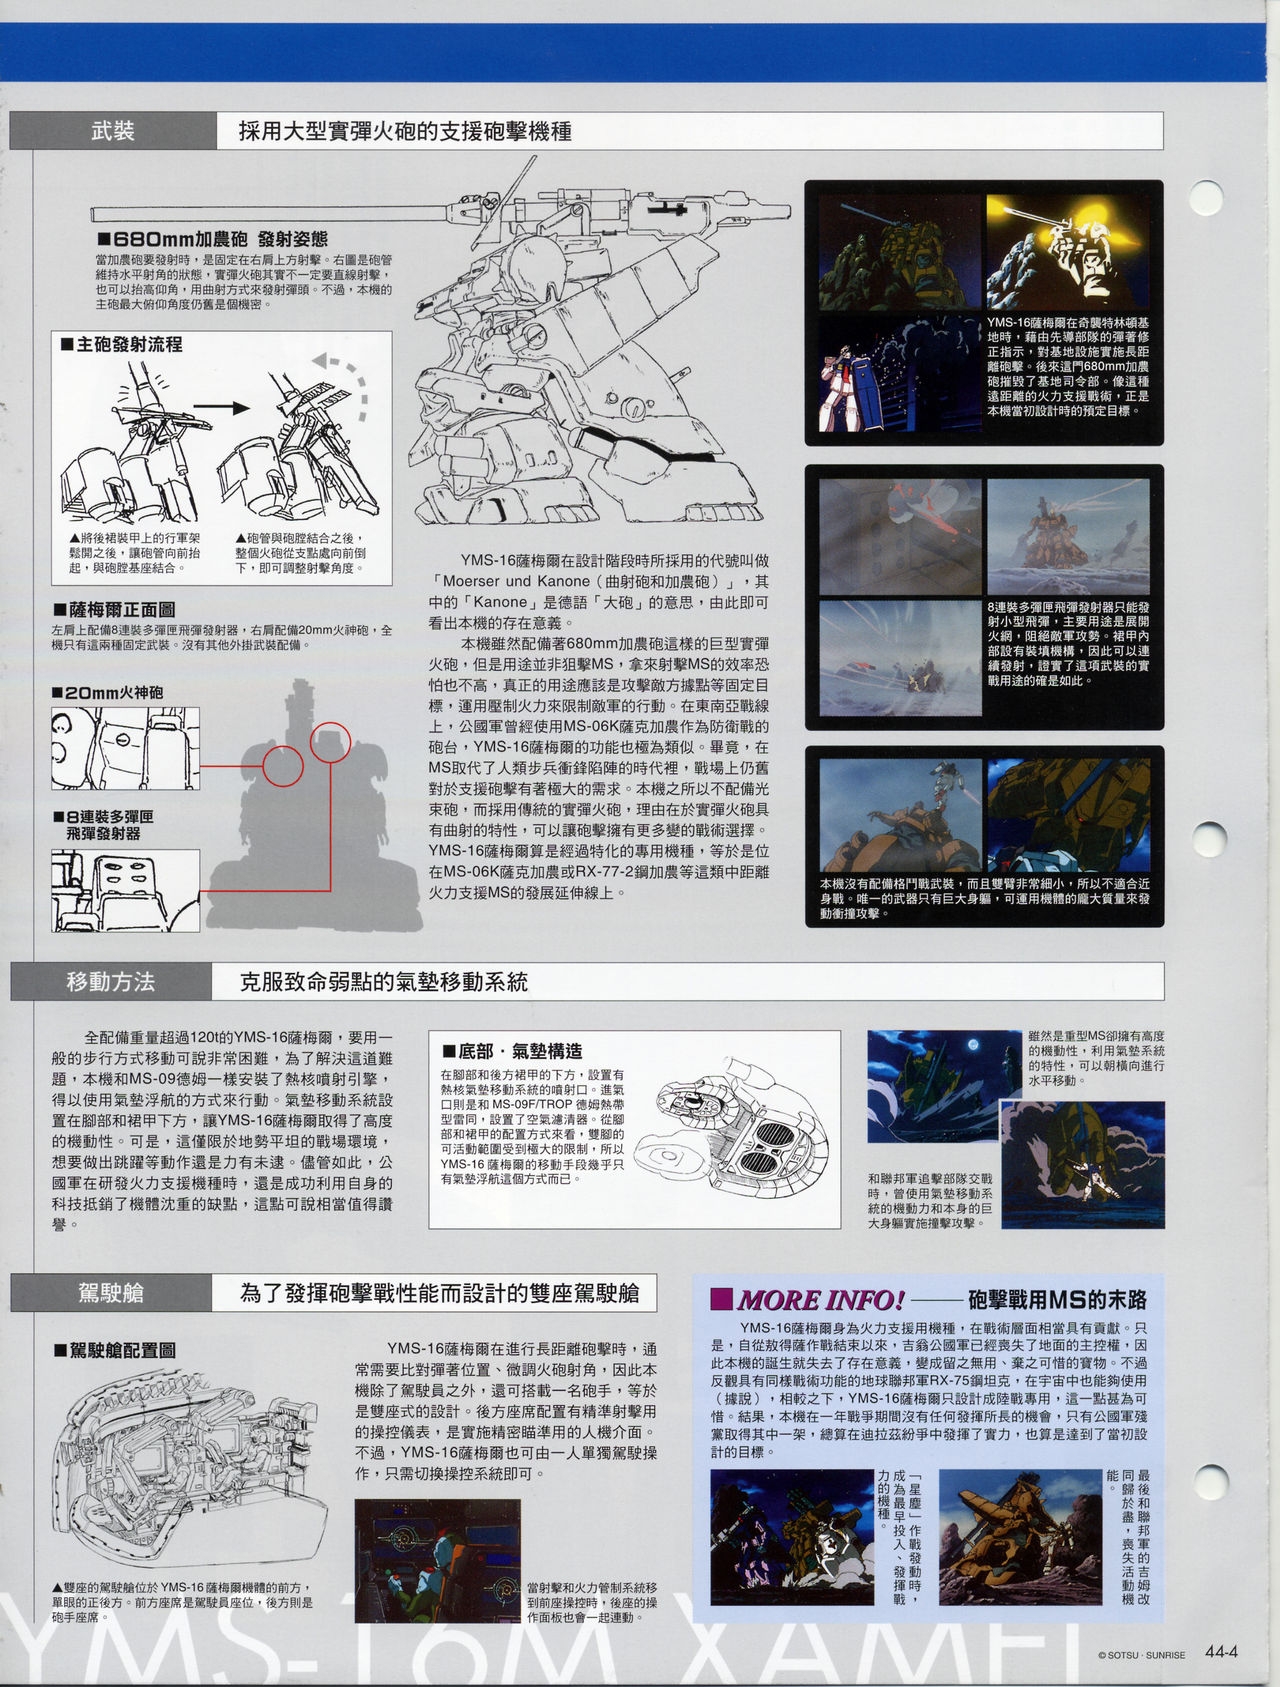 The Official Gundam Fact File - 044 [Chinese] 6